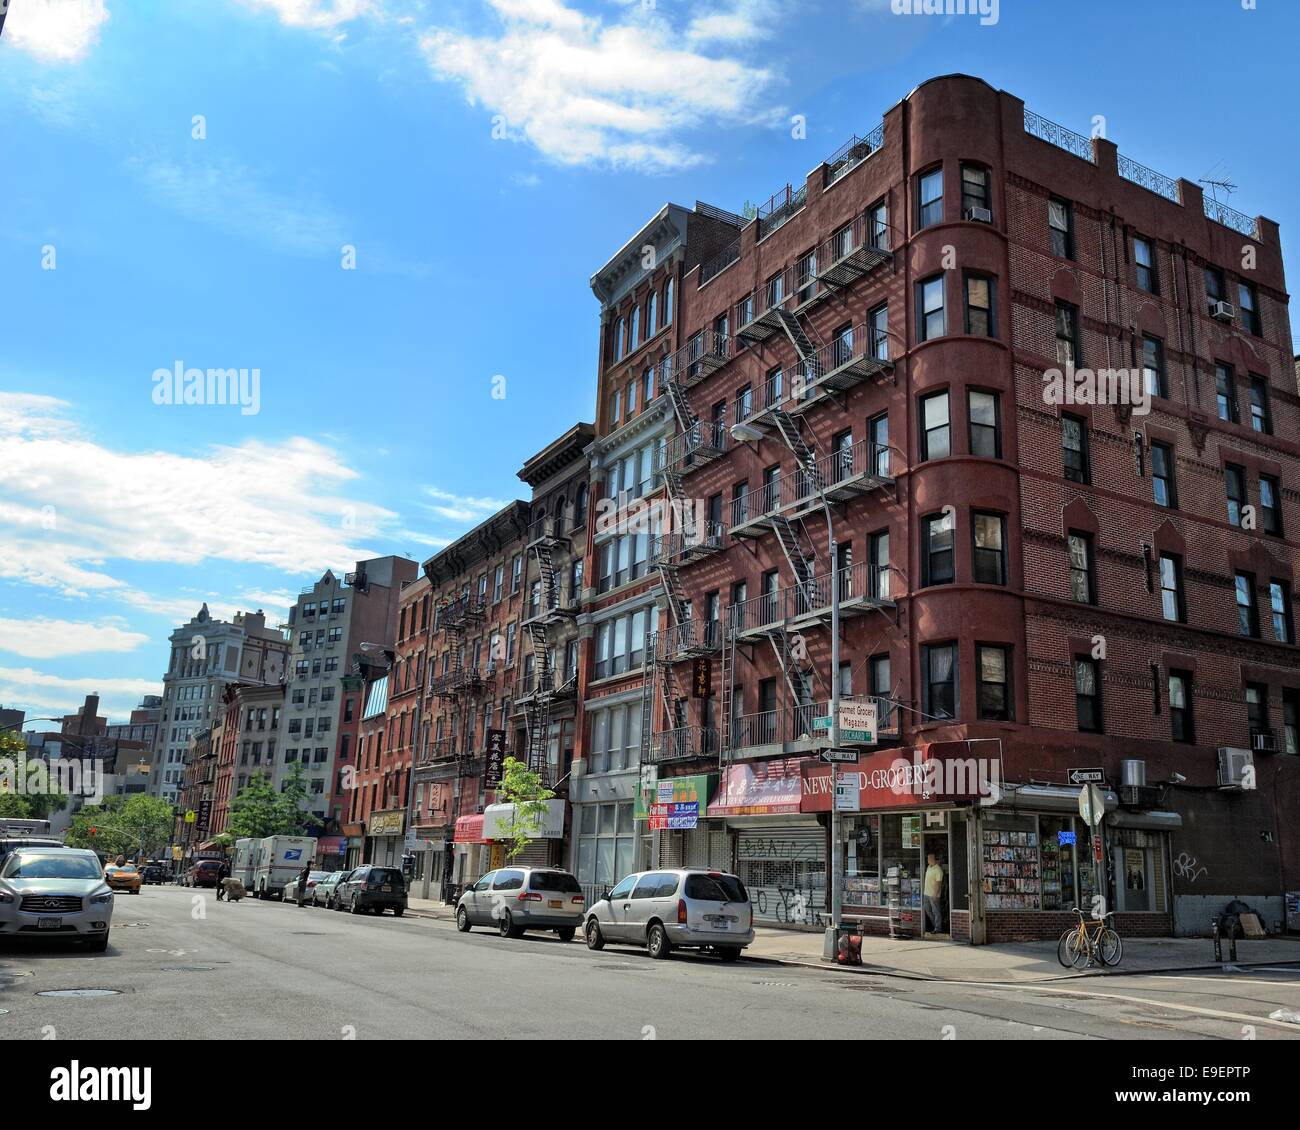 The red brick building the street  view in New York city Stock Photo